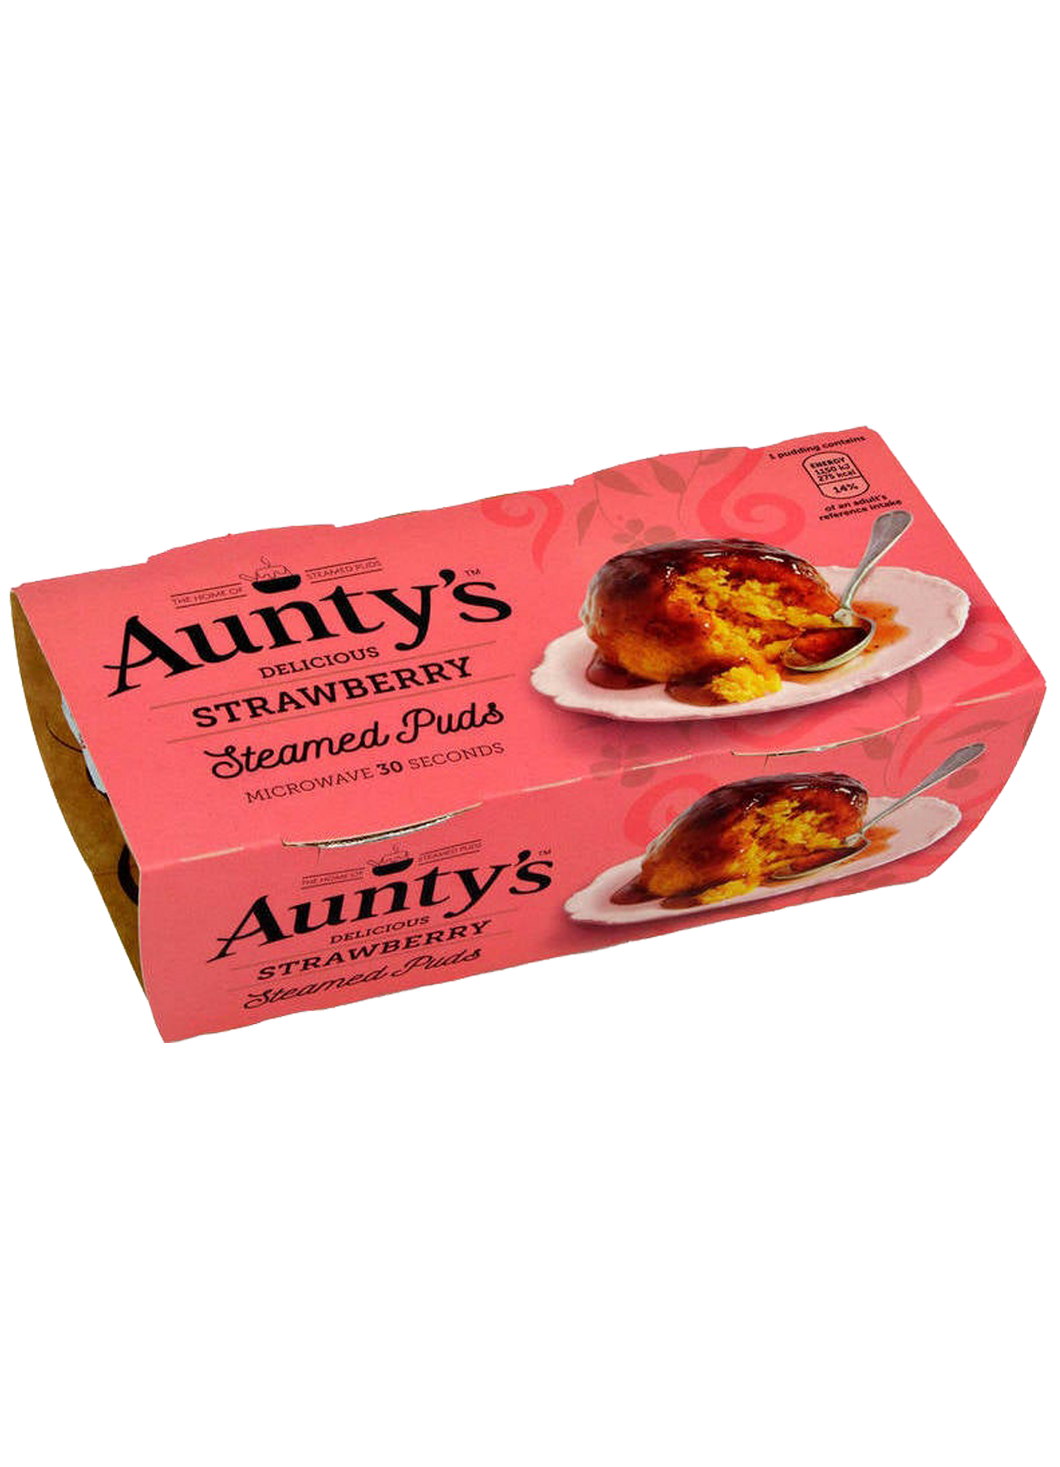 Aunty's Strawberry Steamed Puds (2 Puddings) 190g